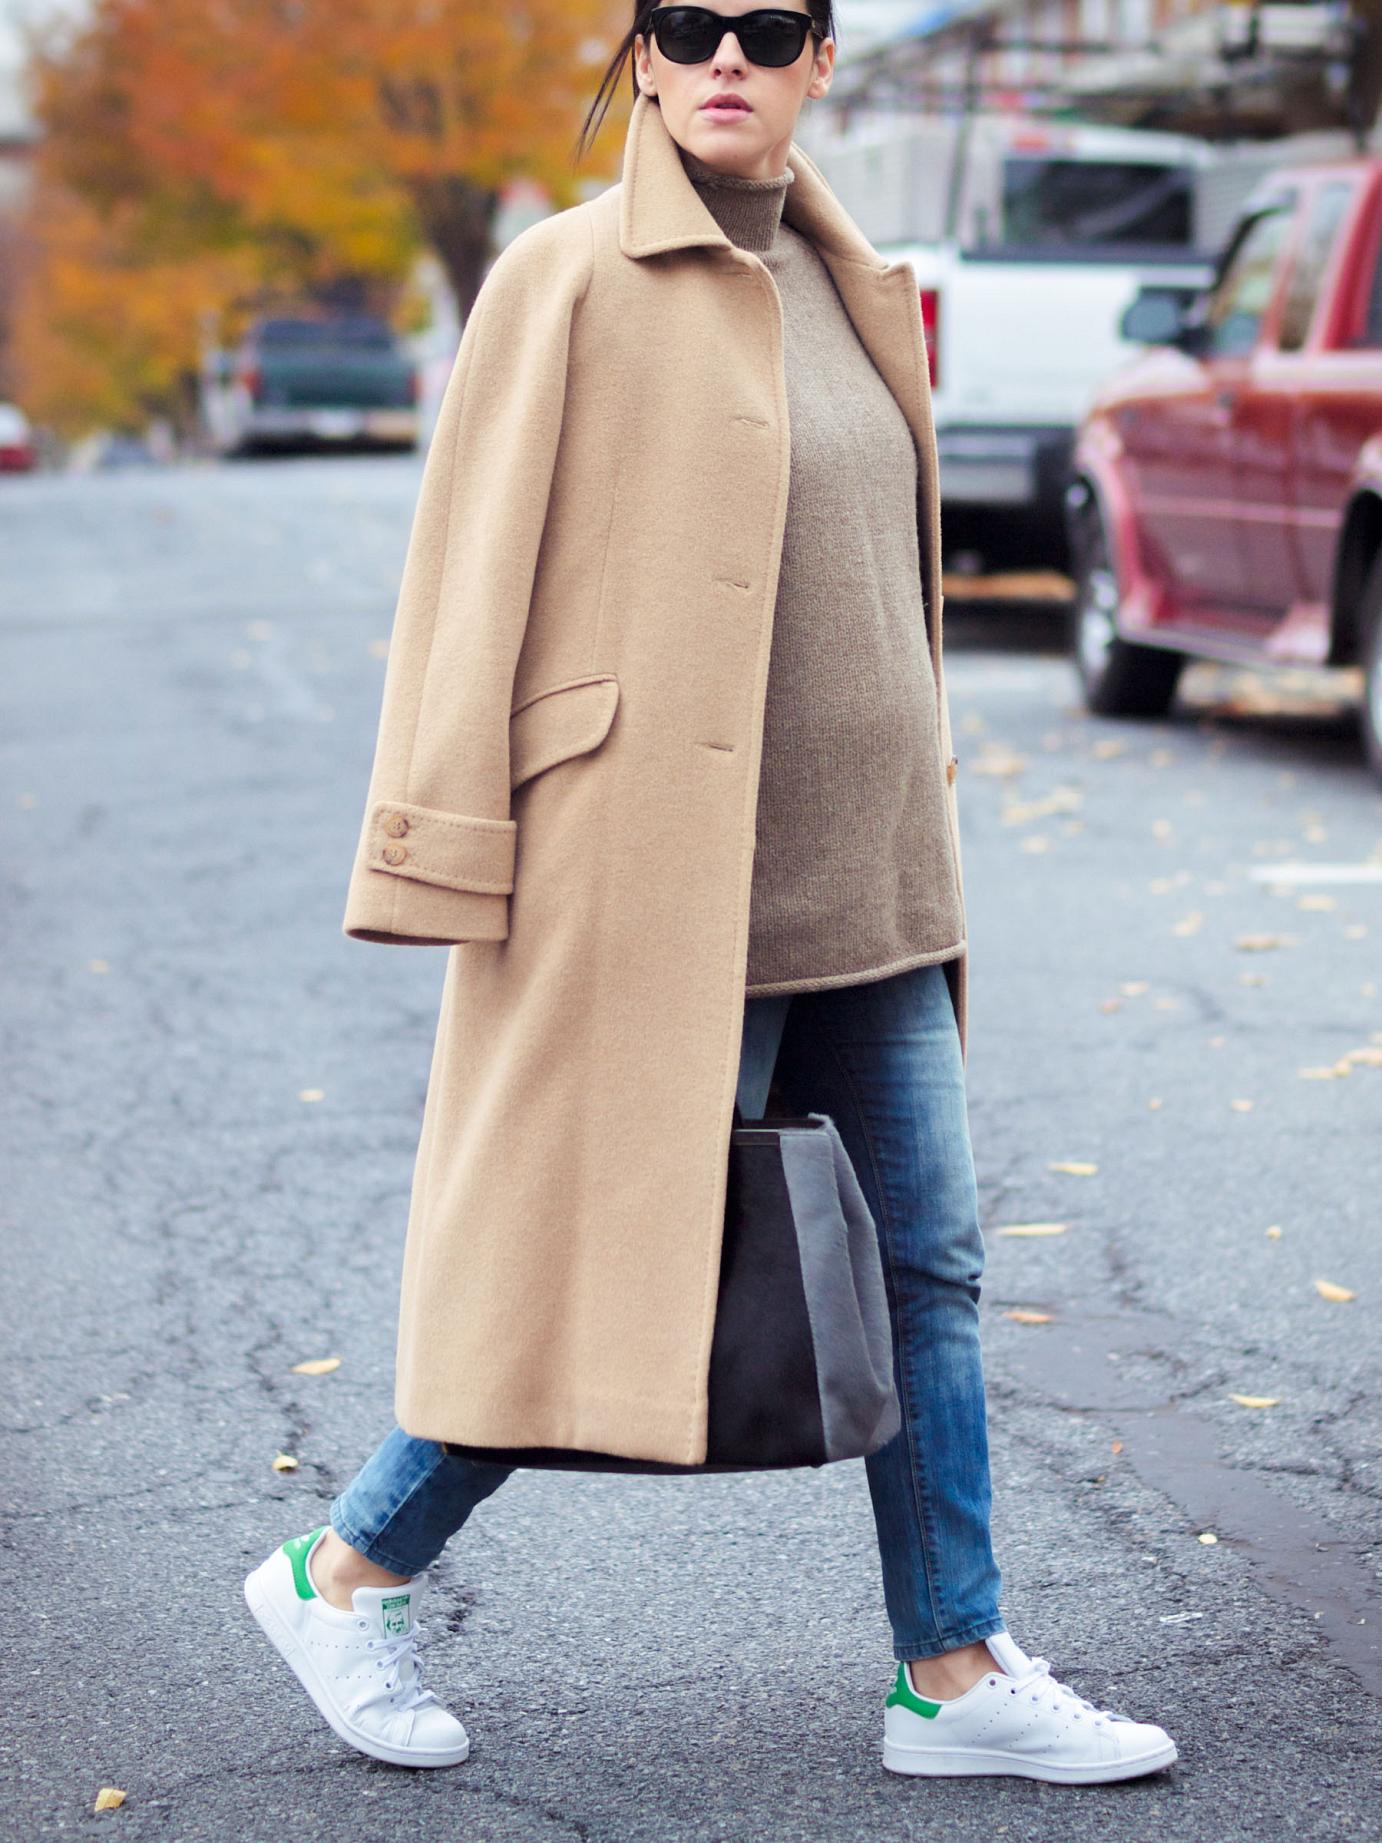 bittersweet colours, fall, fall coats, fall street style, street style, maternity style, 23 weeks, bump style, camel coat, turtleneck, stan smith adidas, sneakers trend, 2jours bicolor fendi bag, fendi bag, casual loook, 